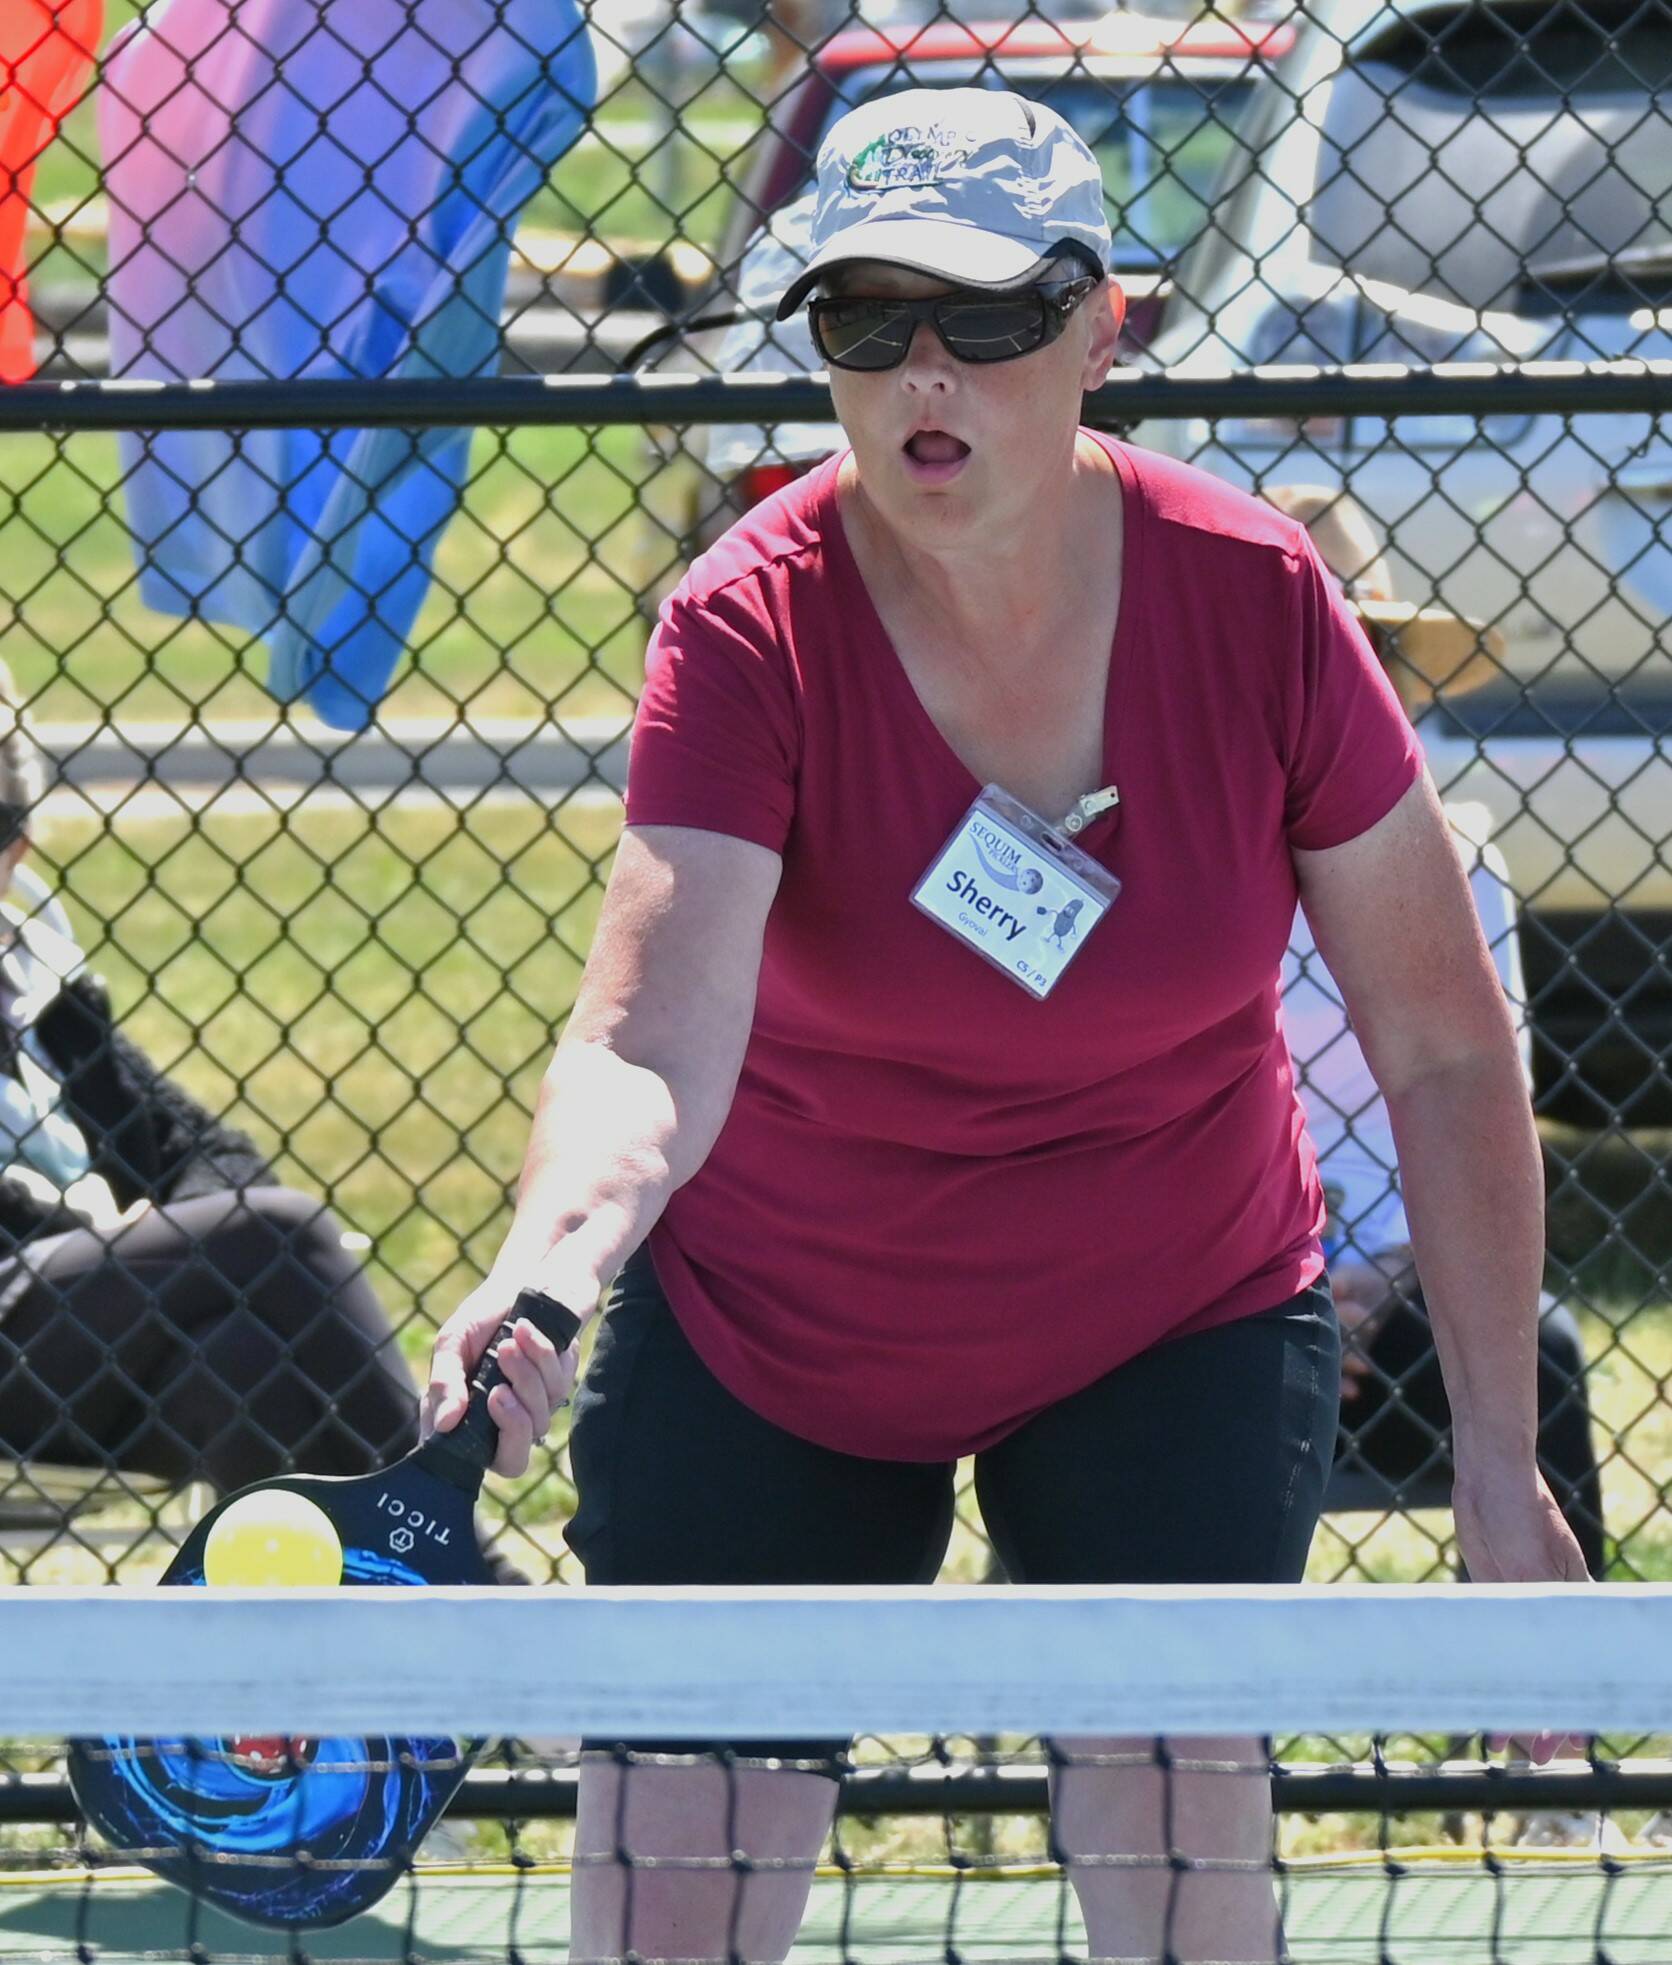 Sequim Gazette photo by Michael Dashiell / Sherri Gyovai returns a volley in the Big Dill Fun Day tournament on May 20 at Carrie Blake Community Park.